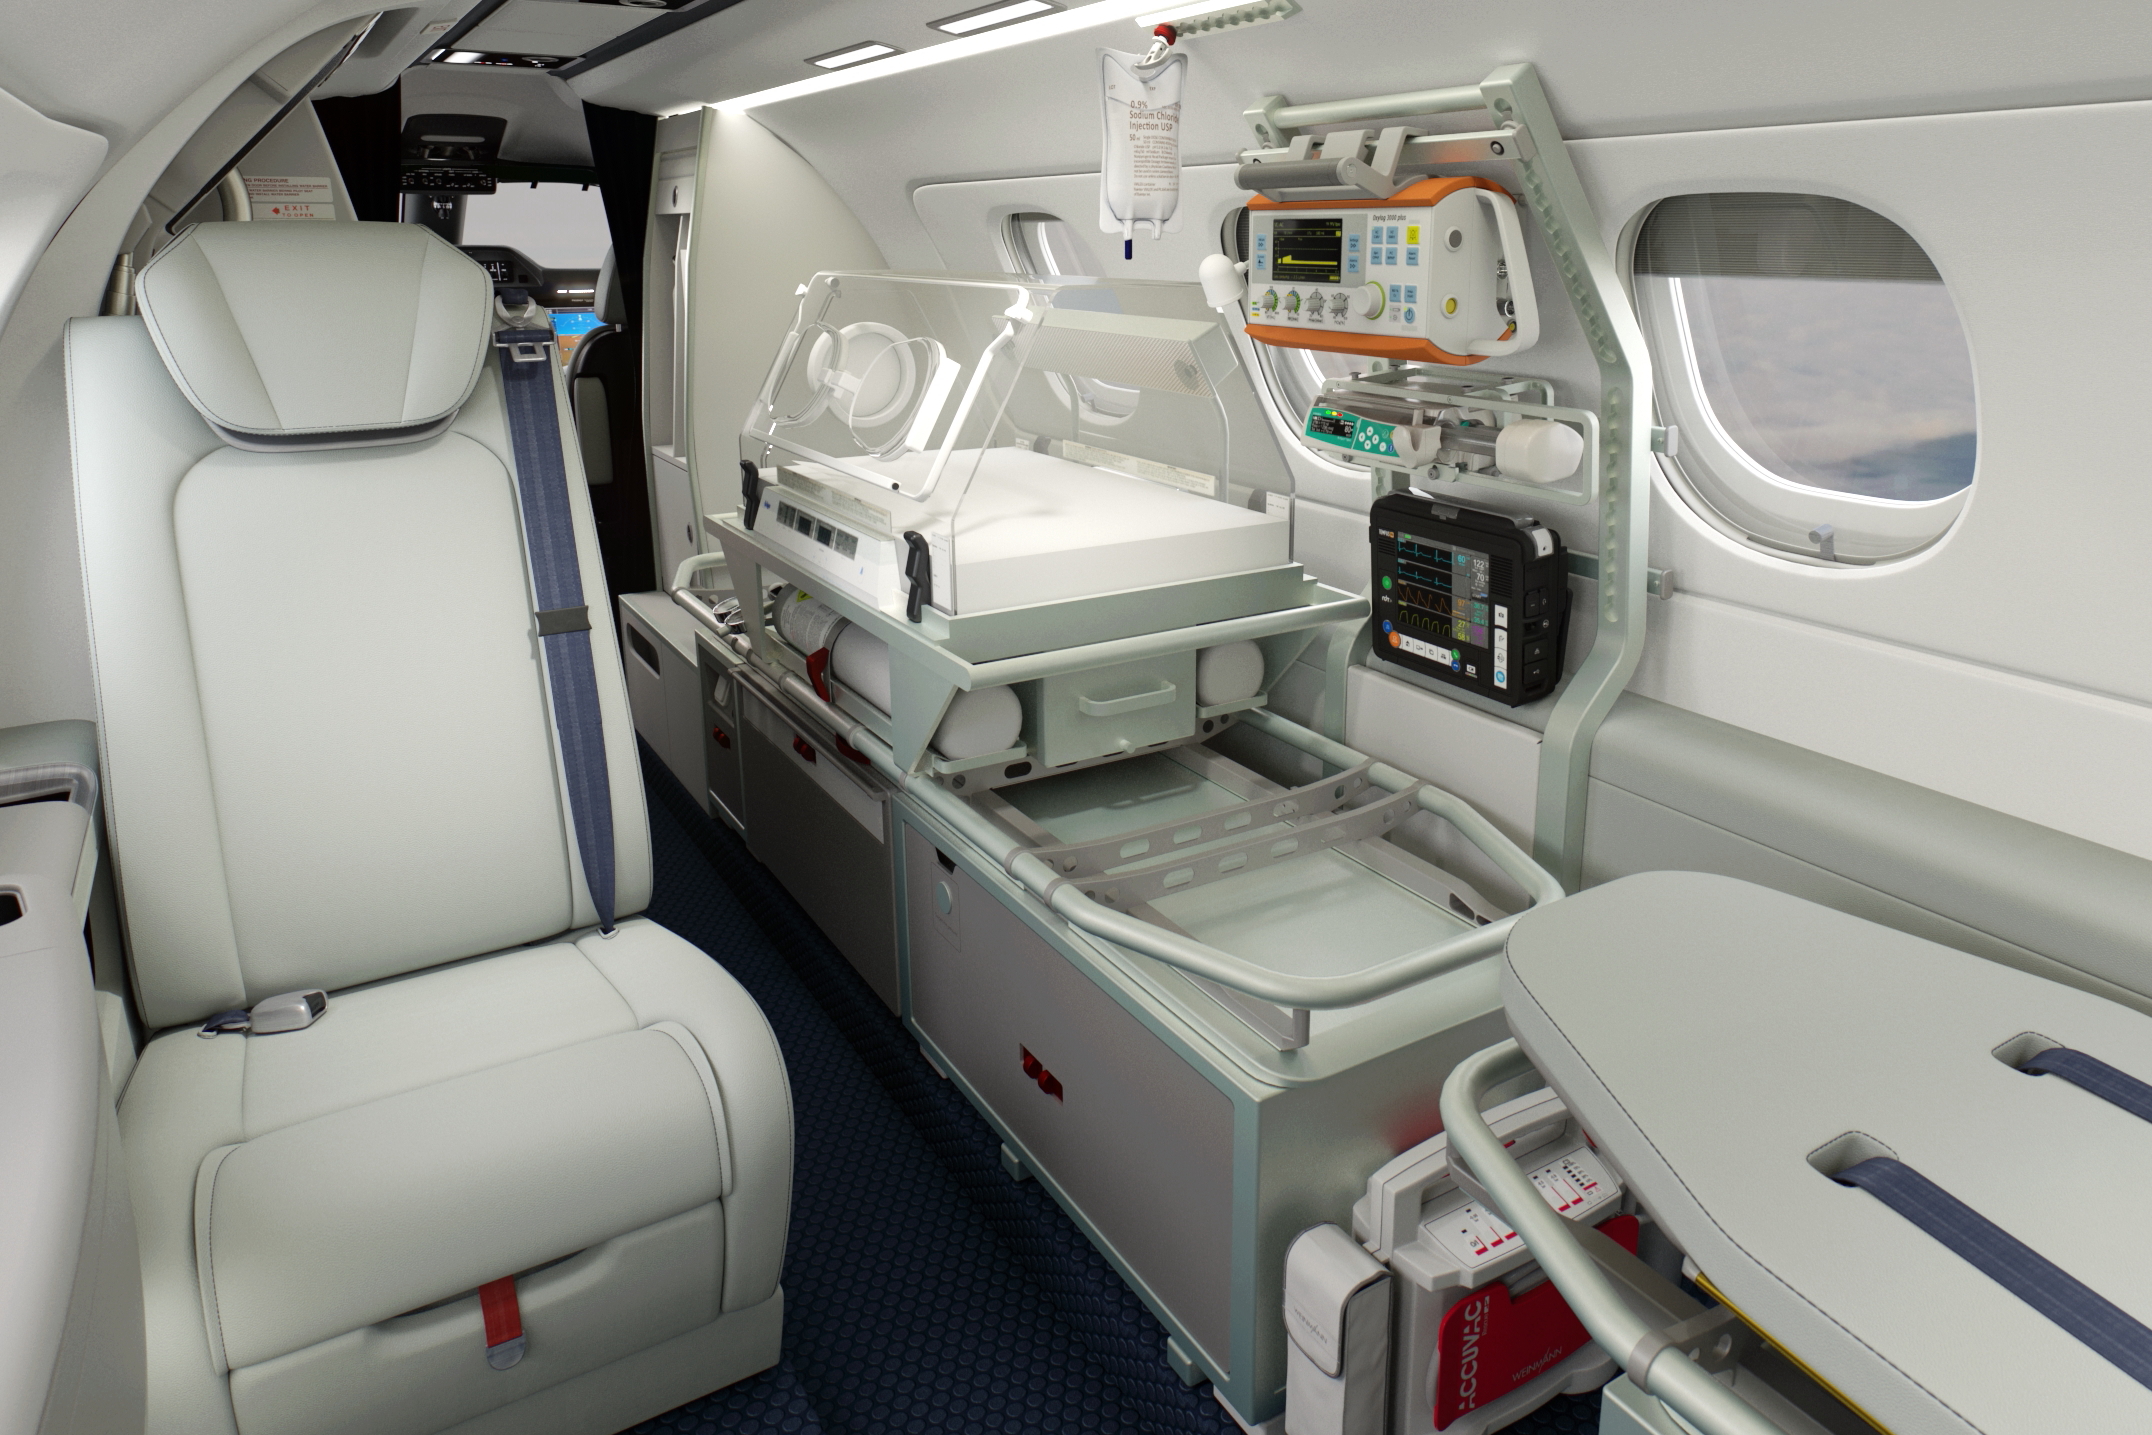 Embraer has launched a Medevac solution for Phenom 300 series aircraft. Designed for both civil and government applications, the Medevac solution will be installed exclusively by Embraer’s Services & Support organization. It is also available for retrofit, through a partnership with umlaut and Aerolite. Click to enlarge.